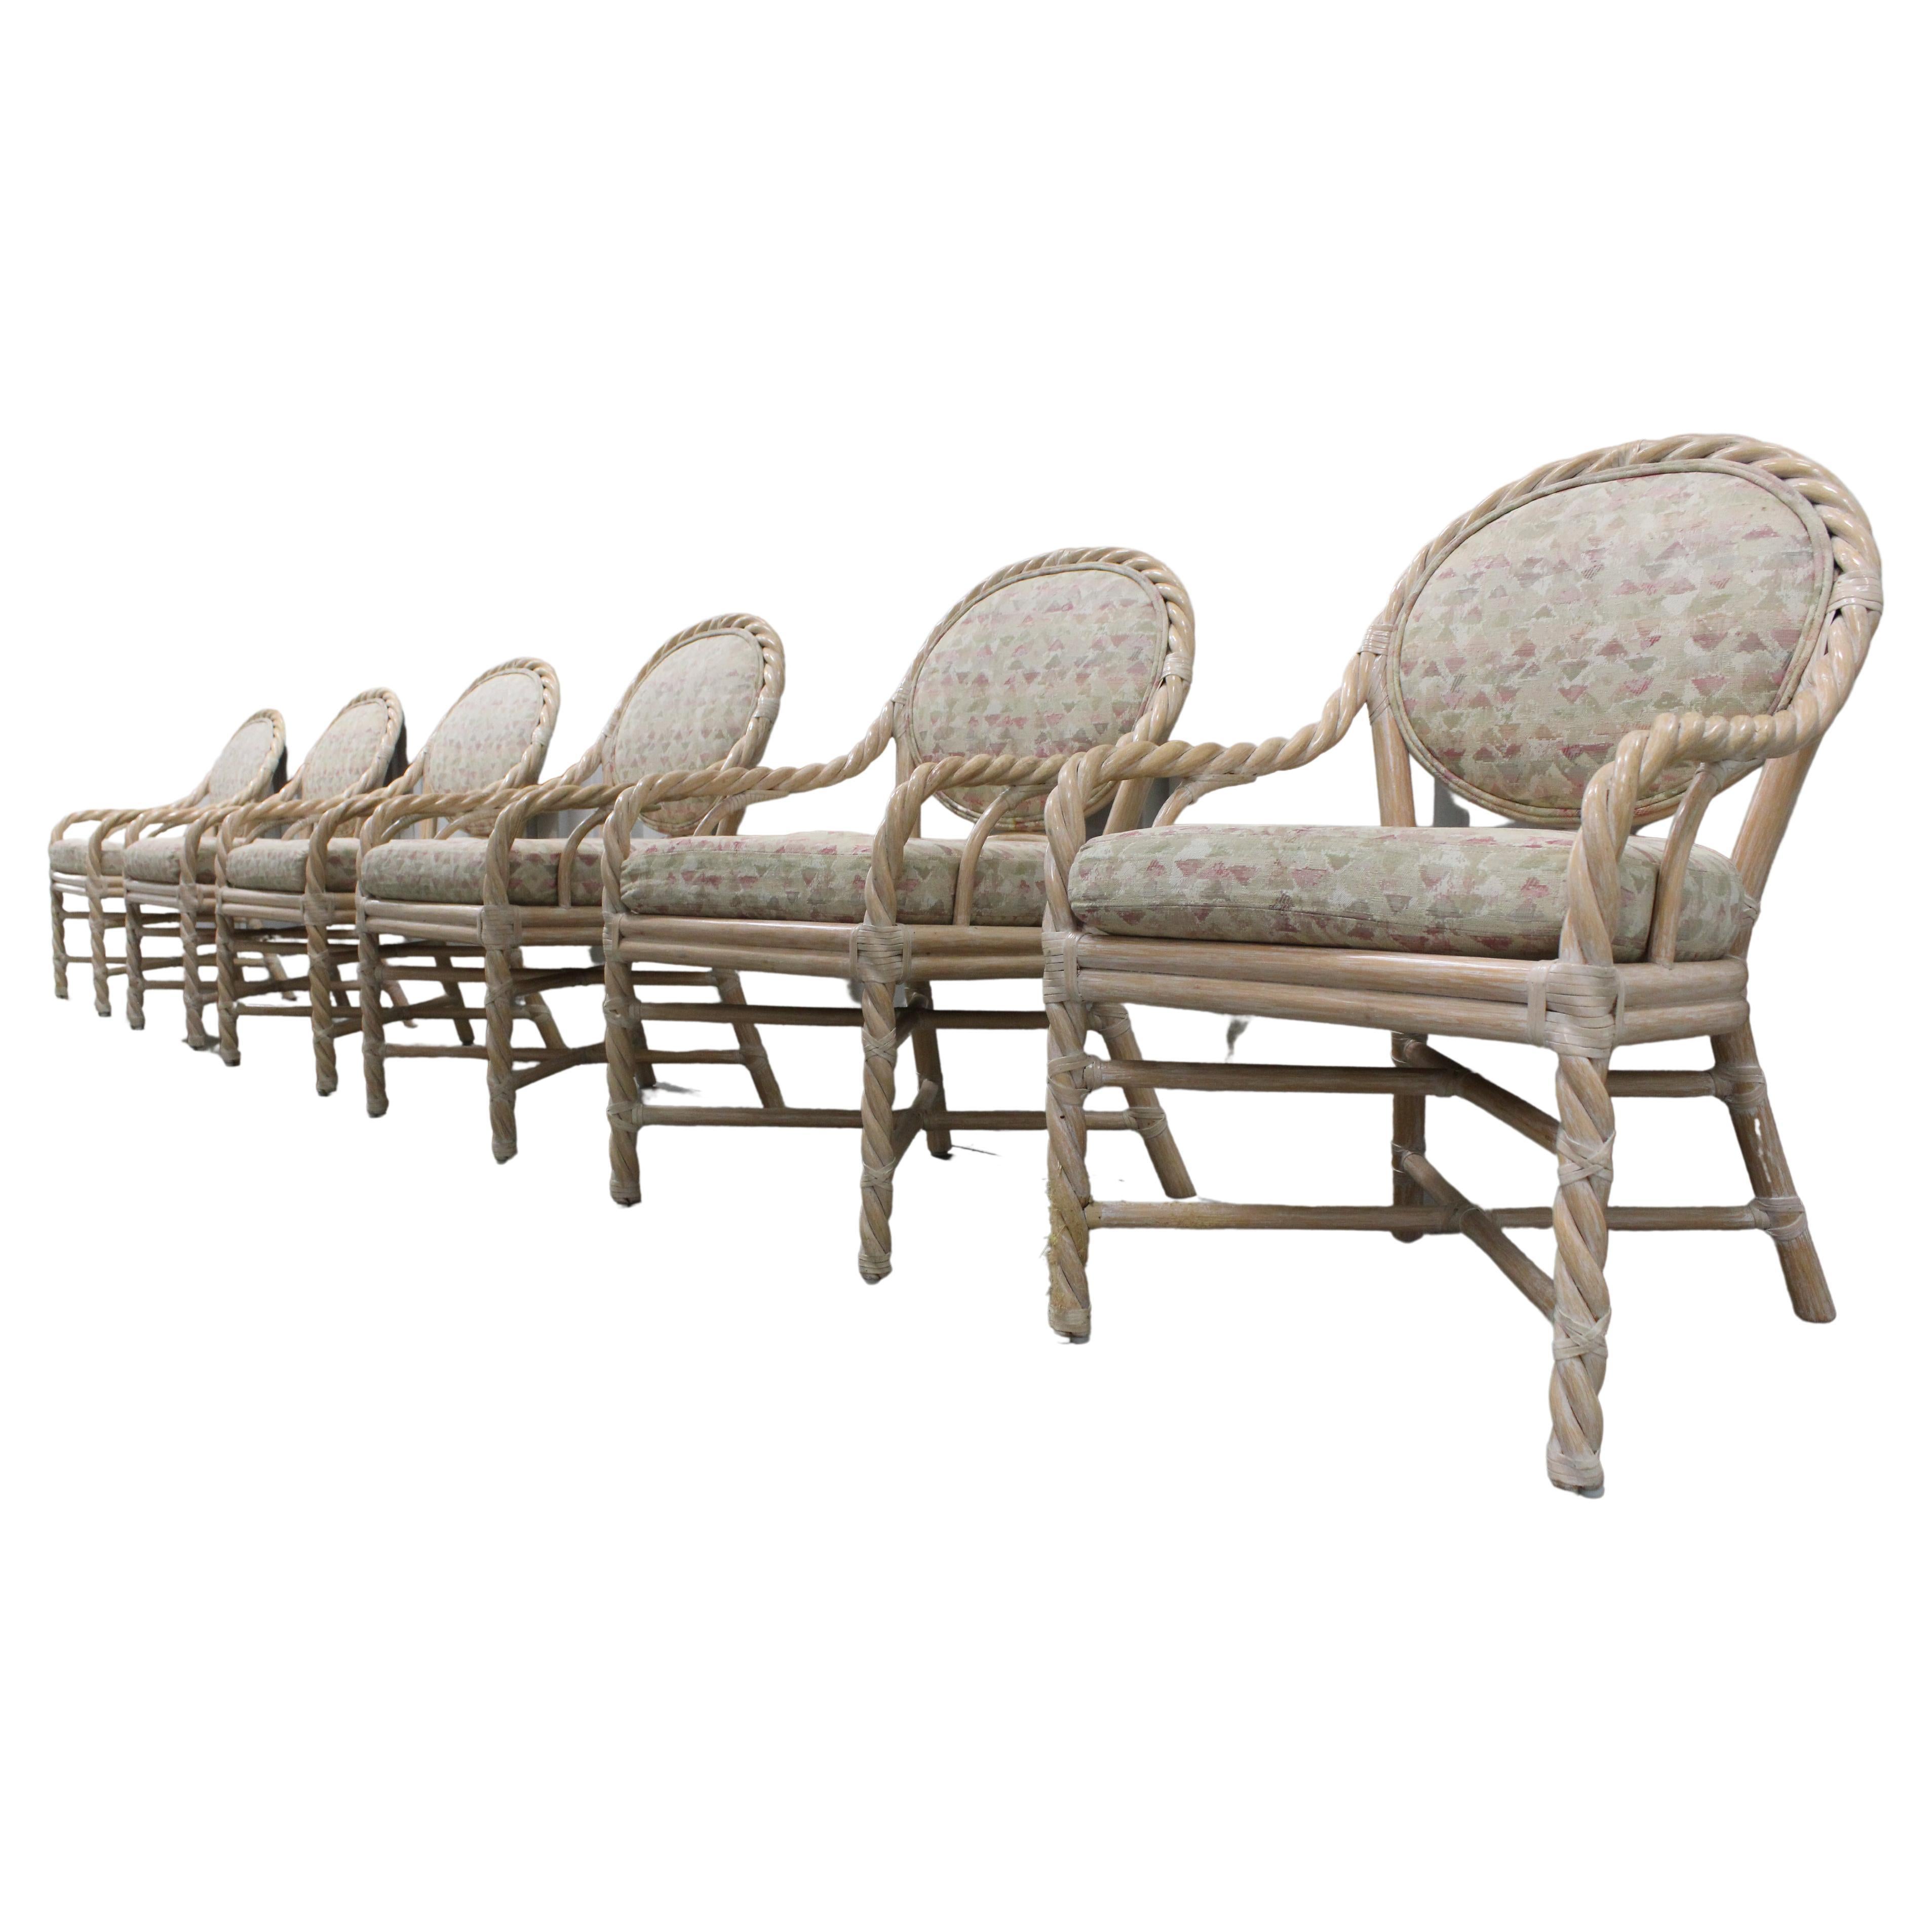 Set of 6 McGuire Twisted Rattan Rawhide Chairs For Sale